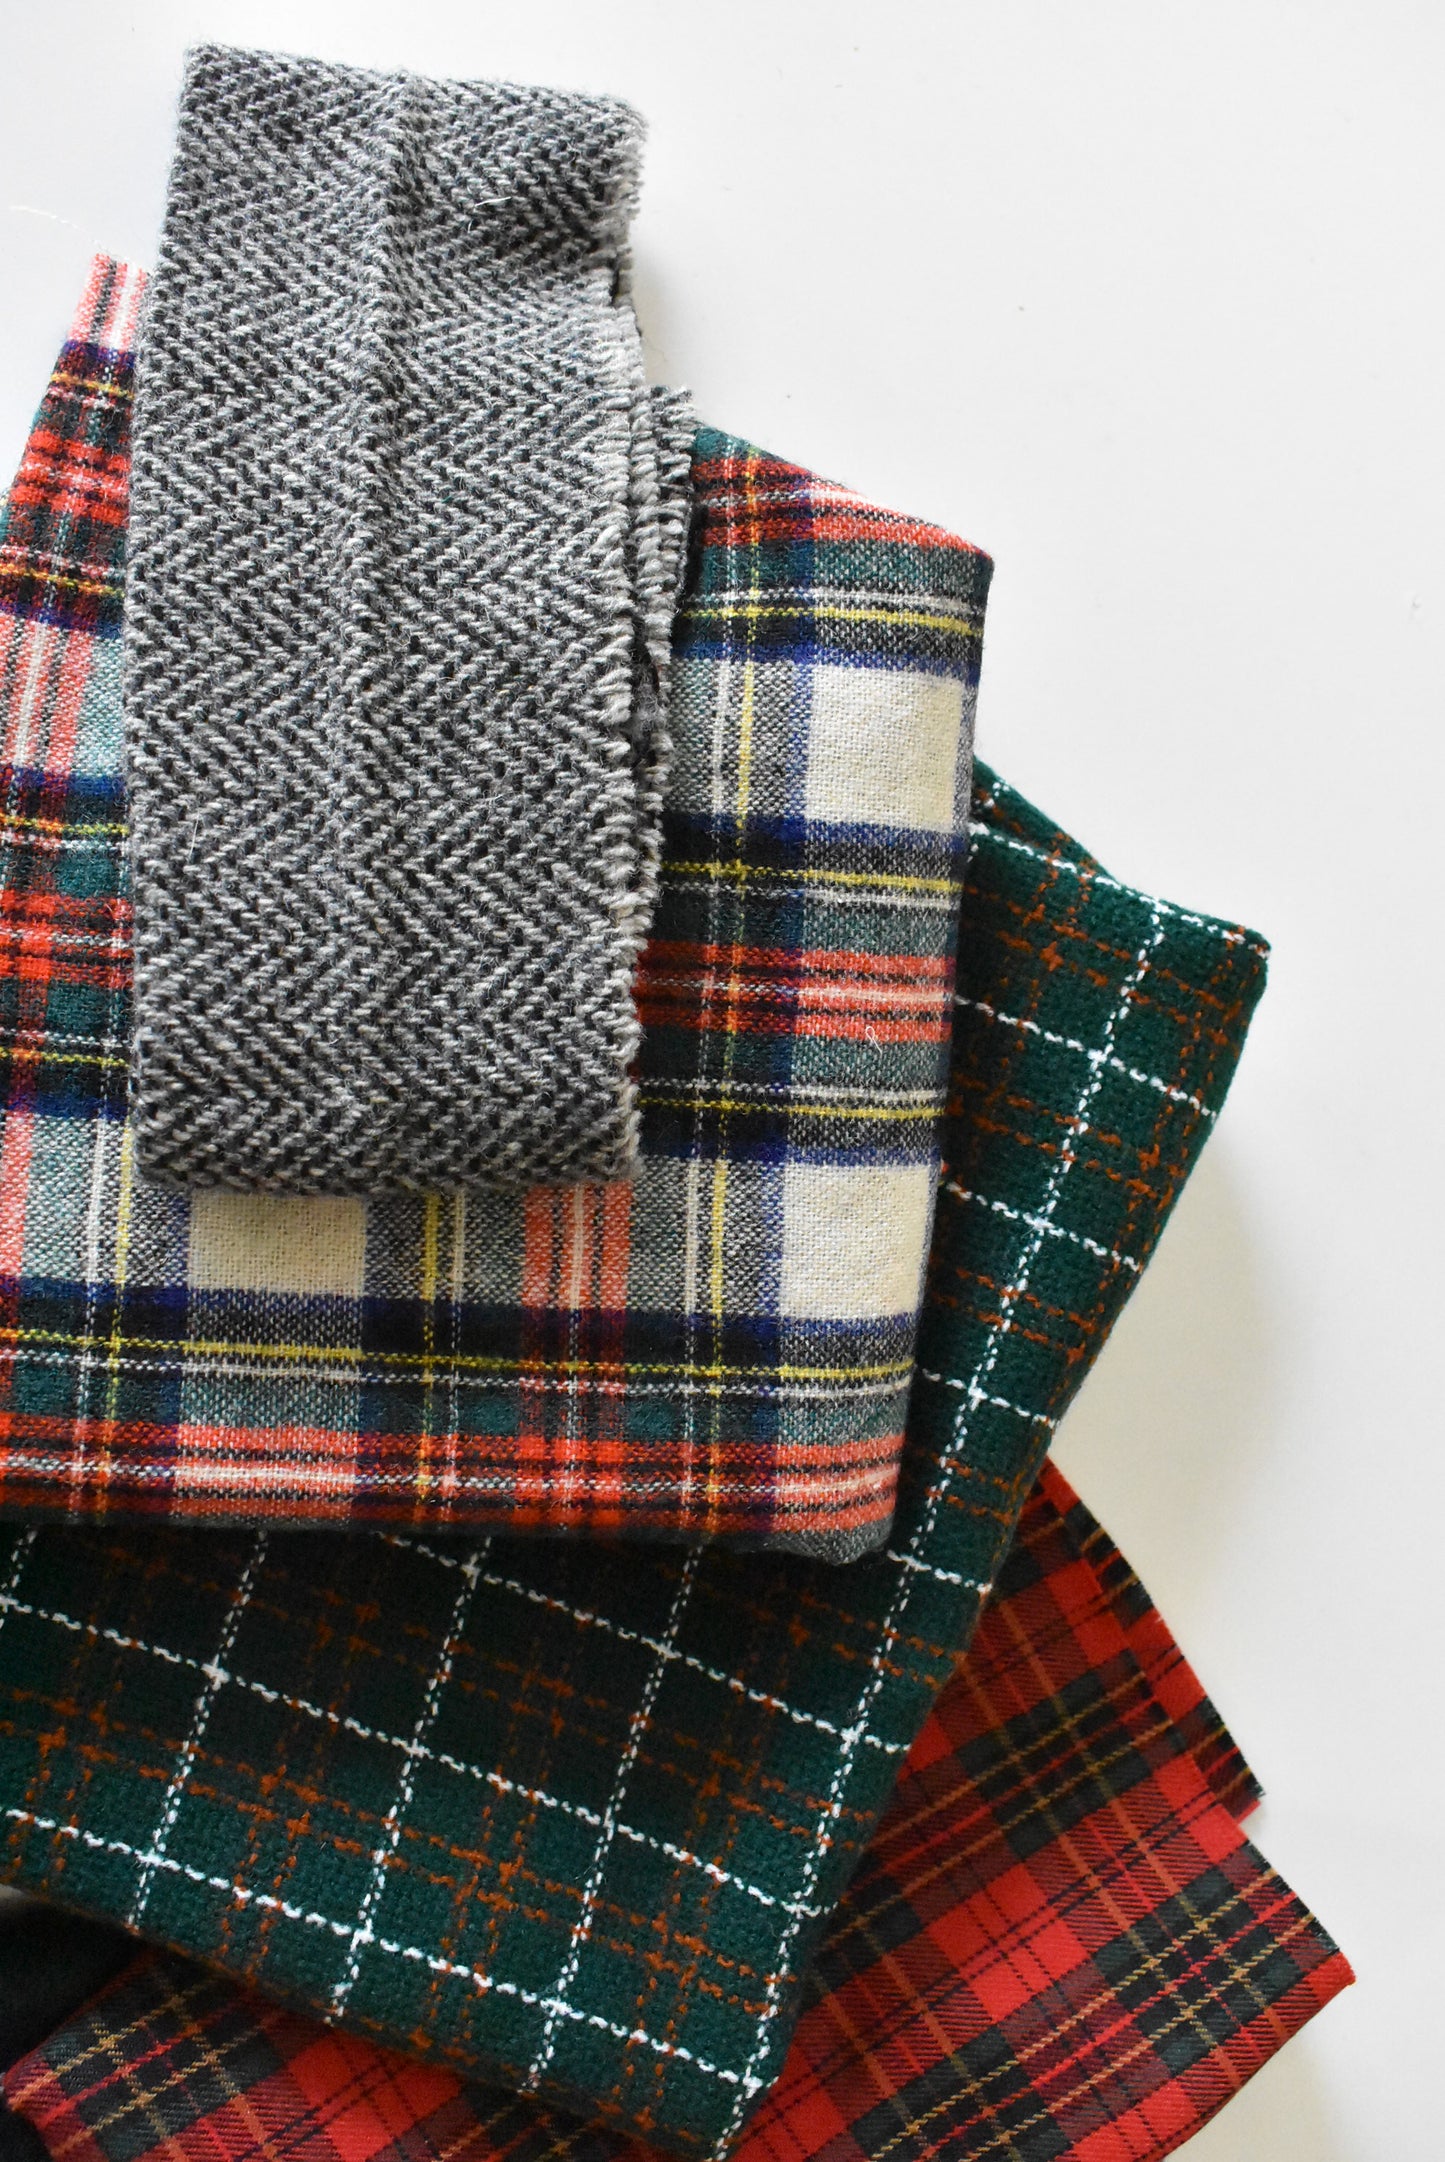 Plaid wool fabric pieces